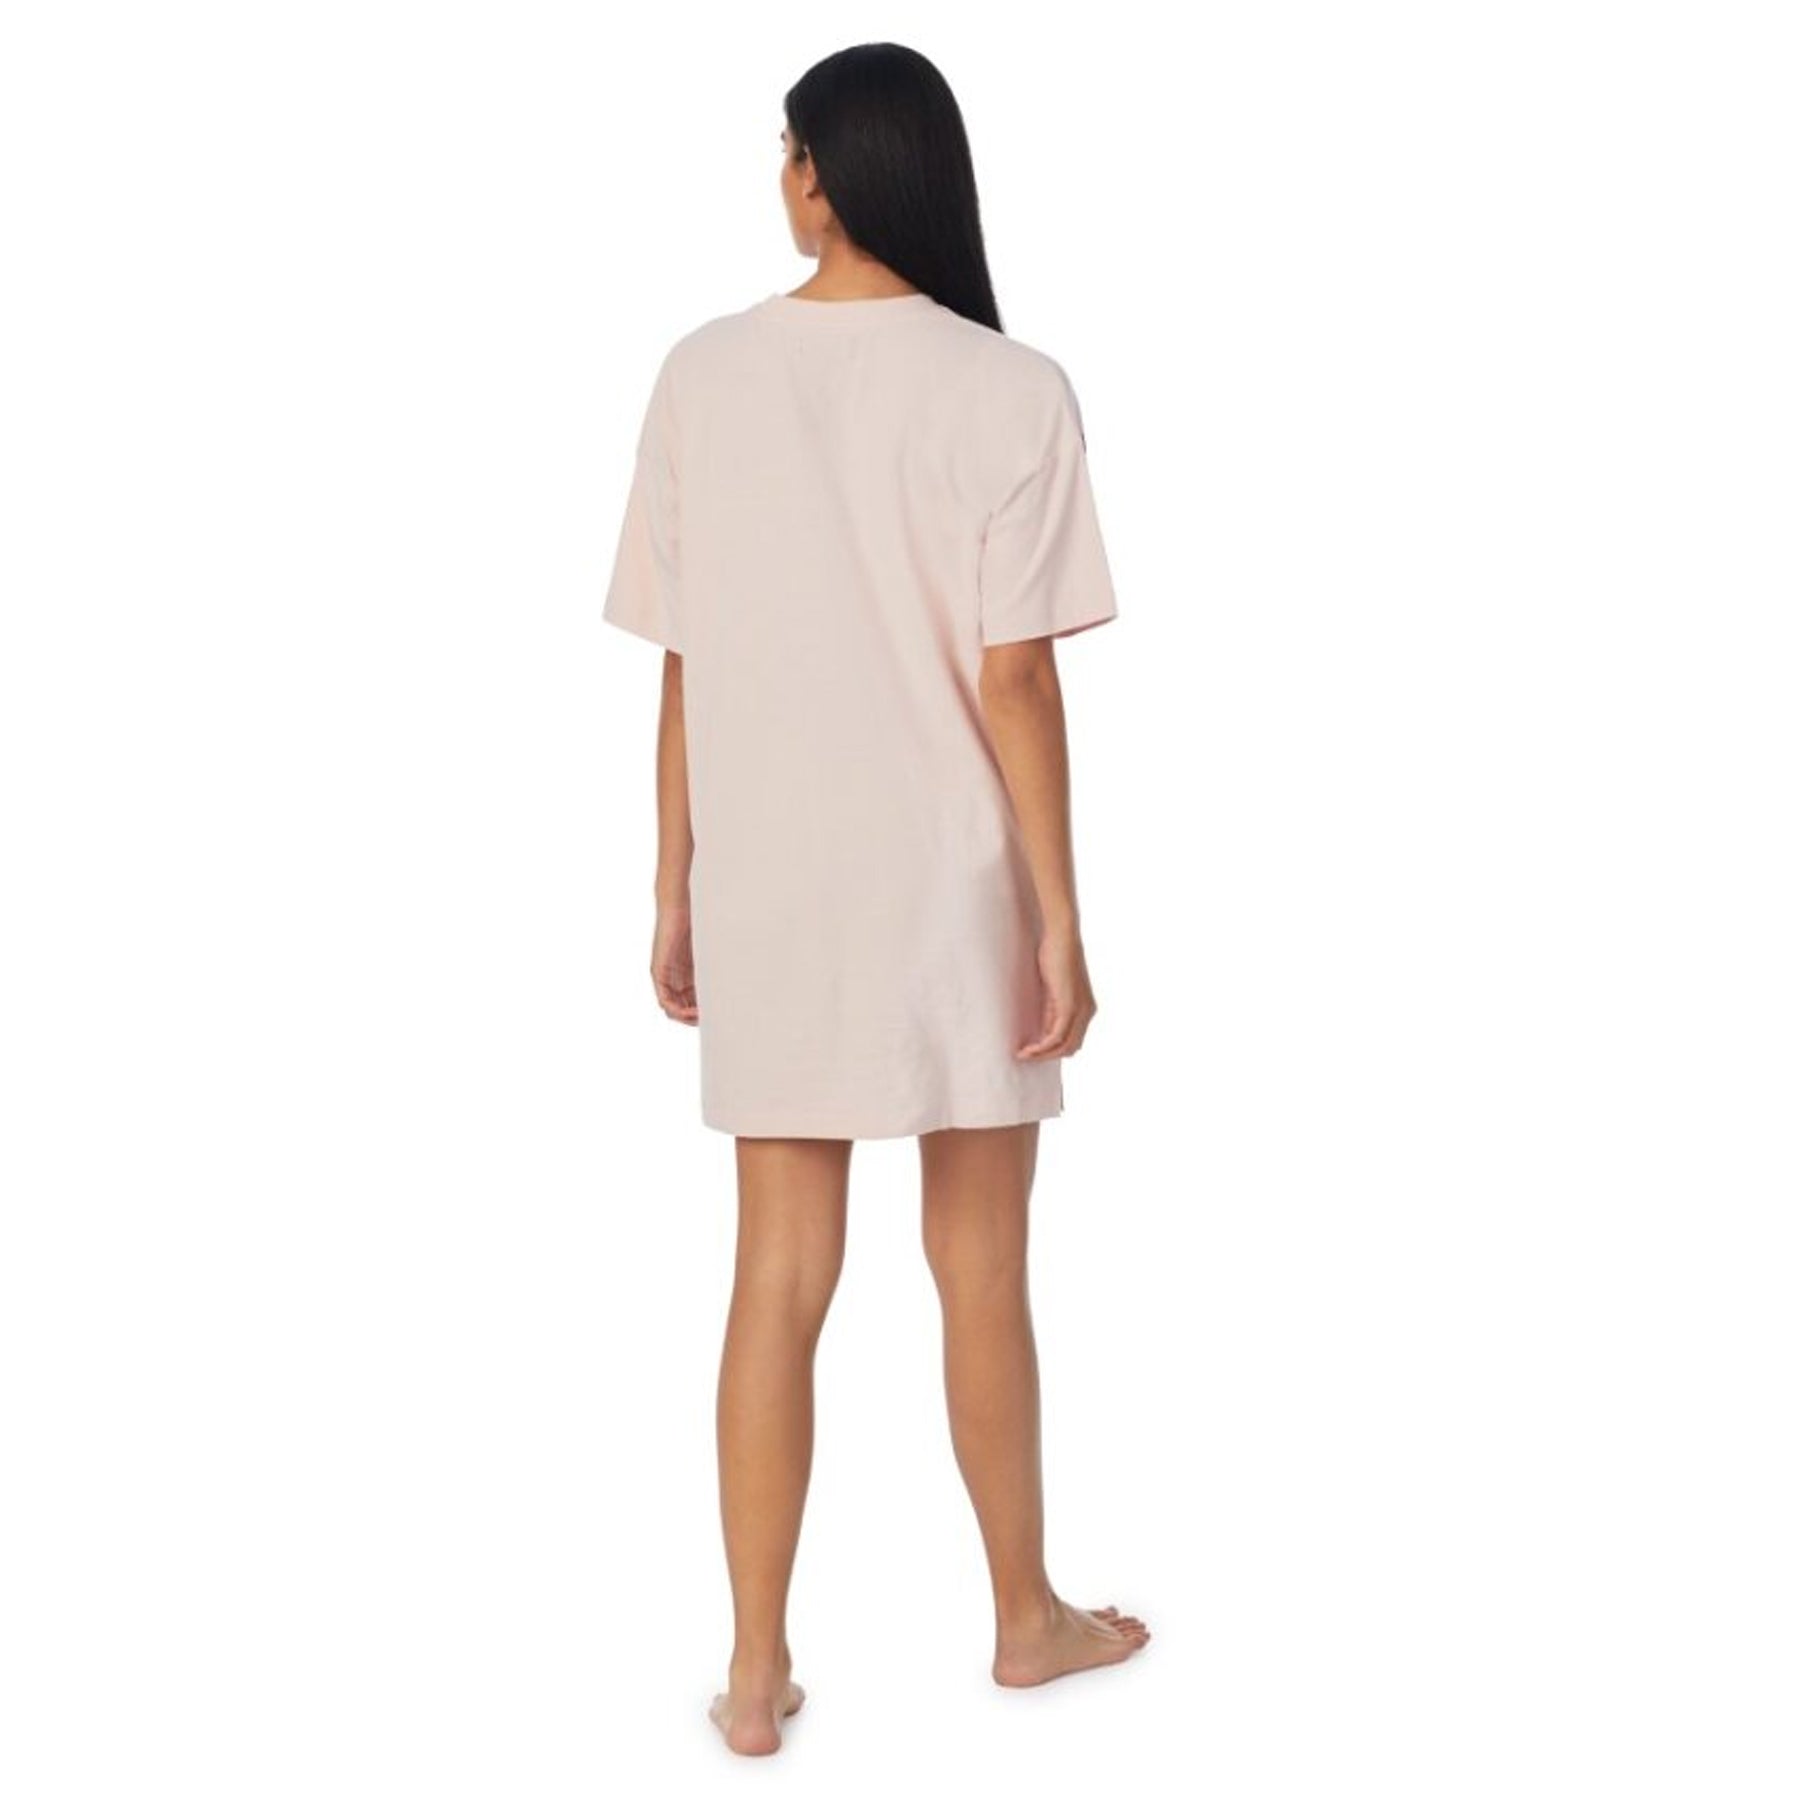 DKNY Upbeat Perspective Nightshirt